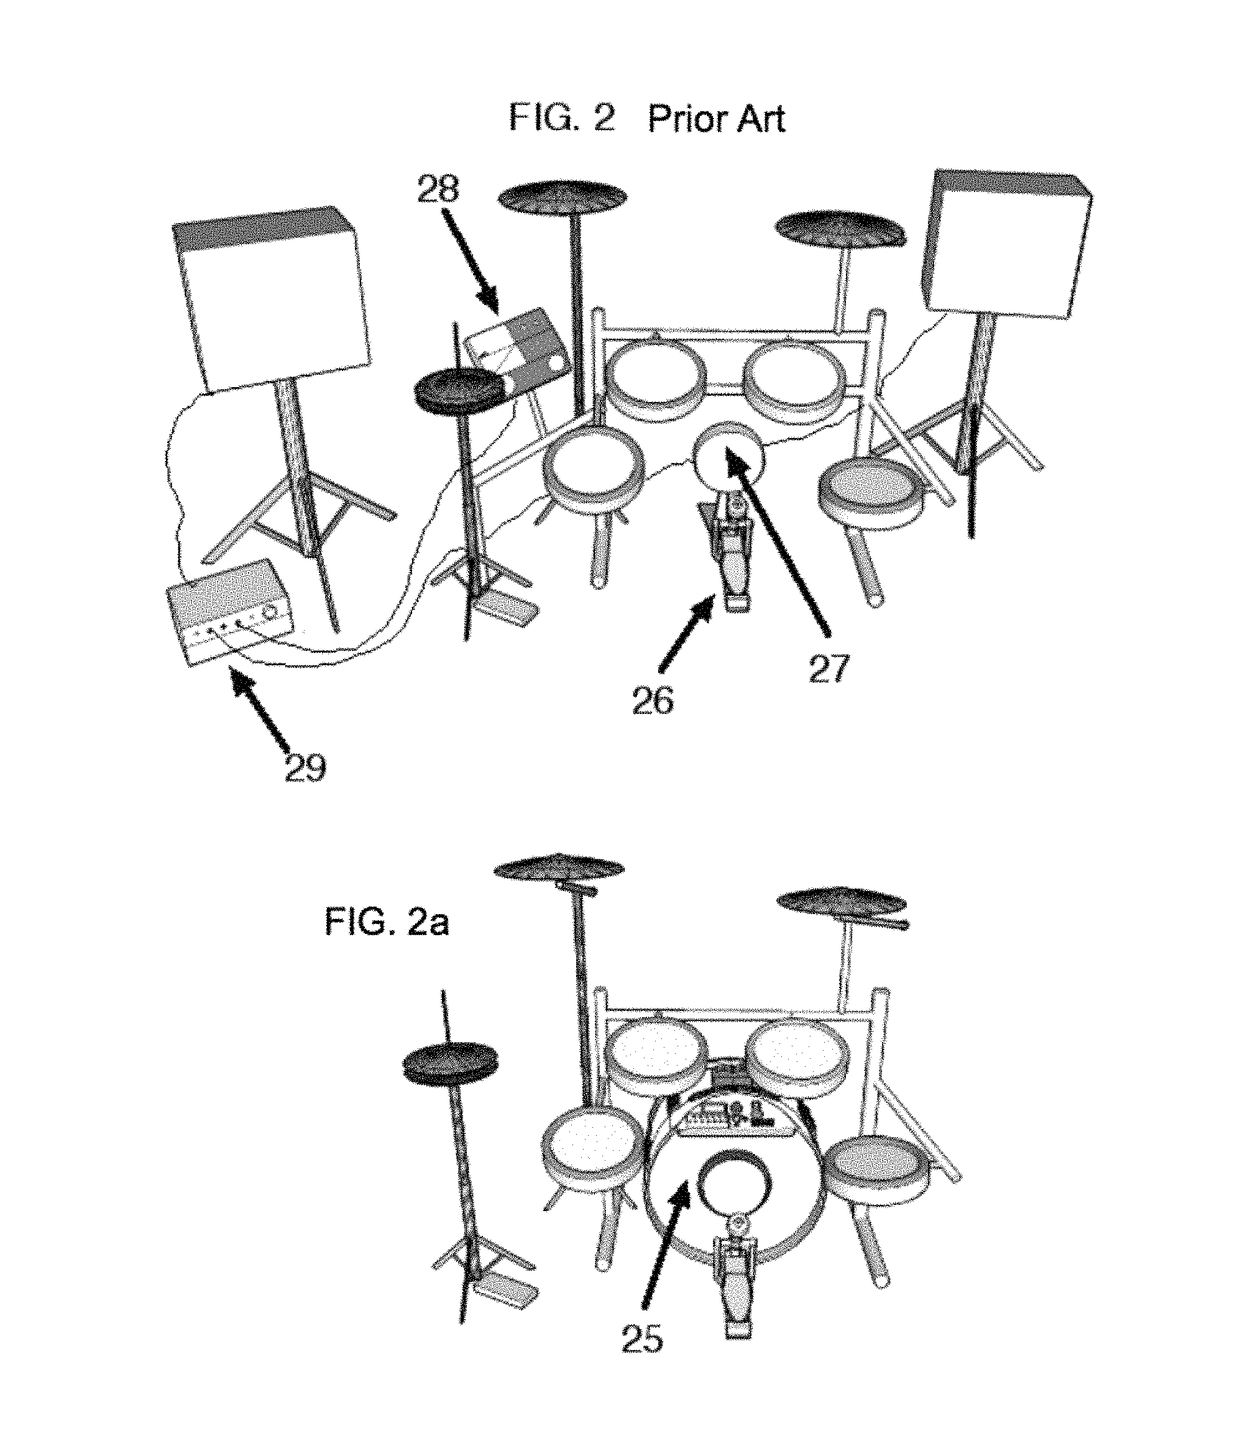 Acoustic-to-electronic bass drum conversion kit